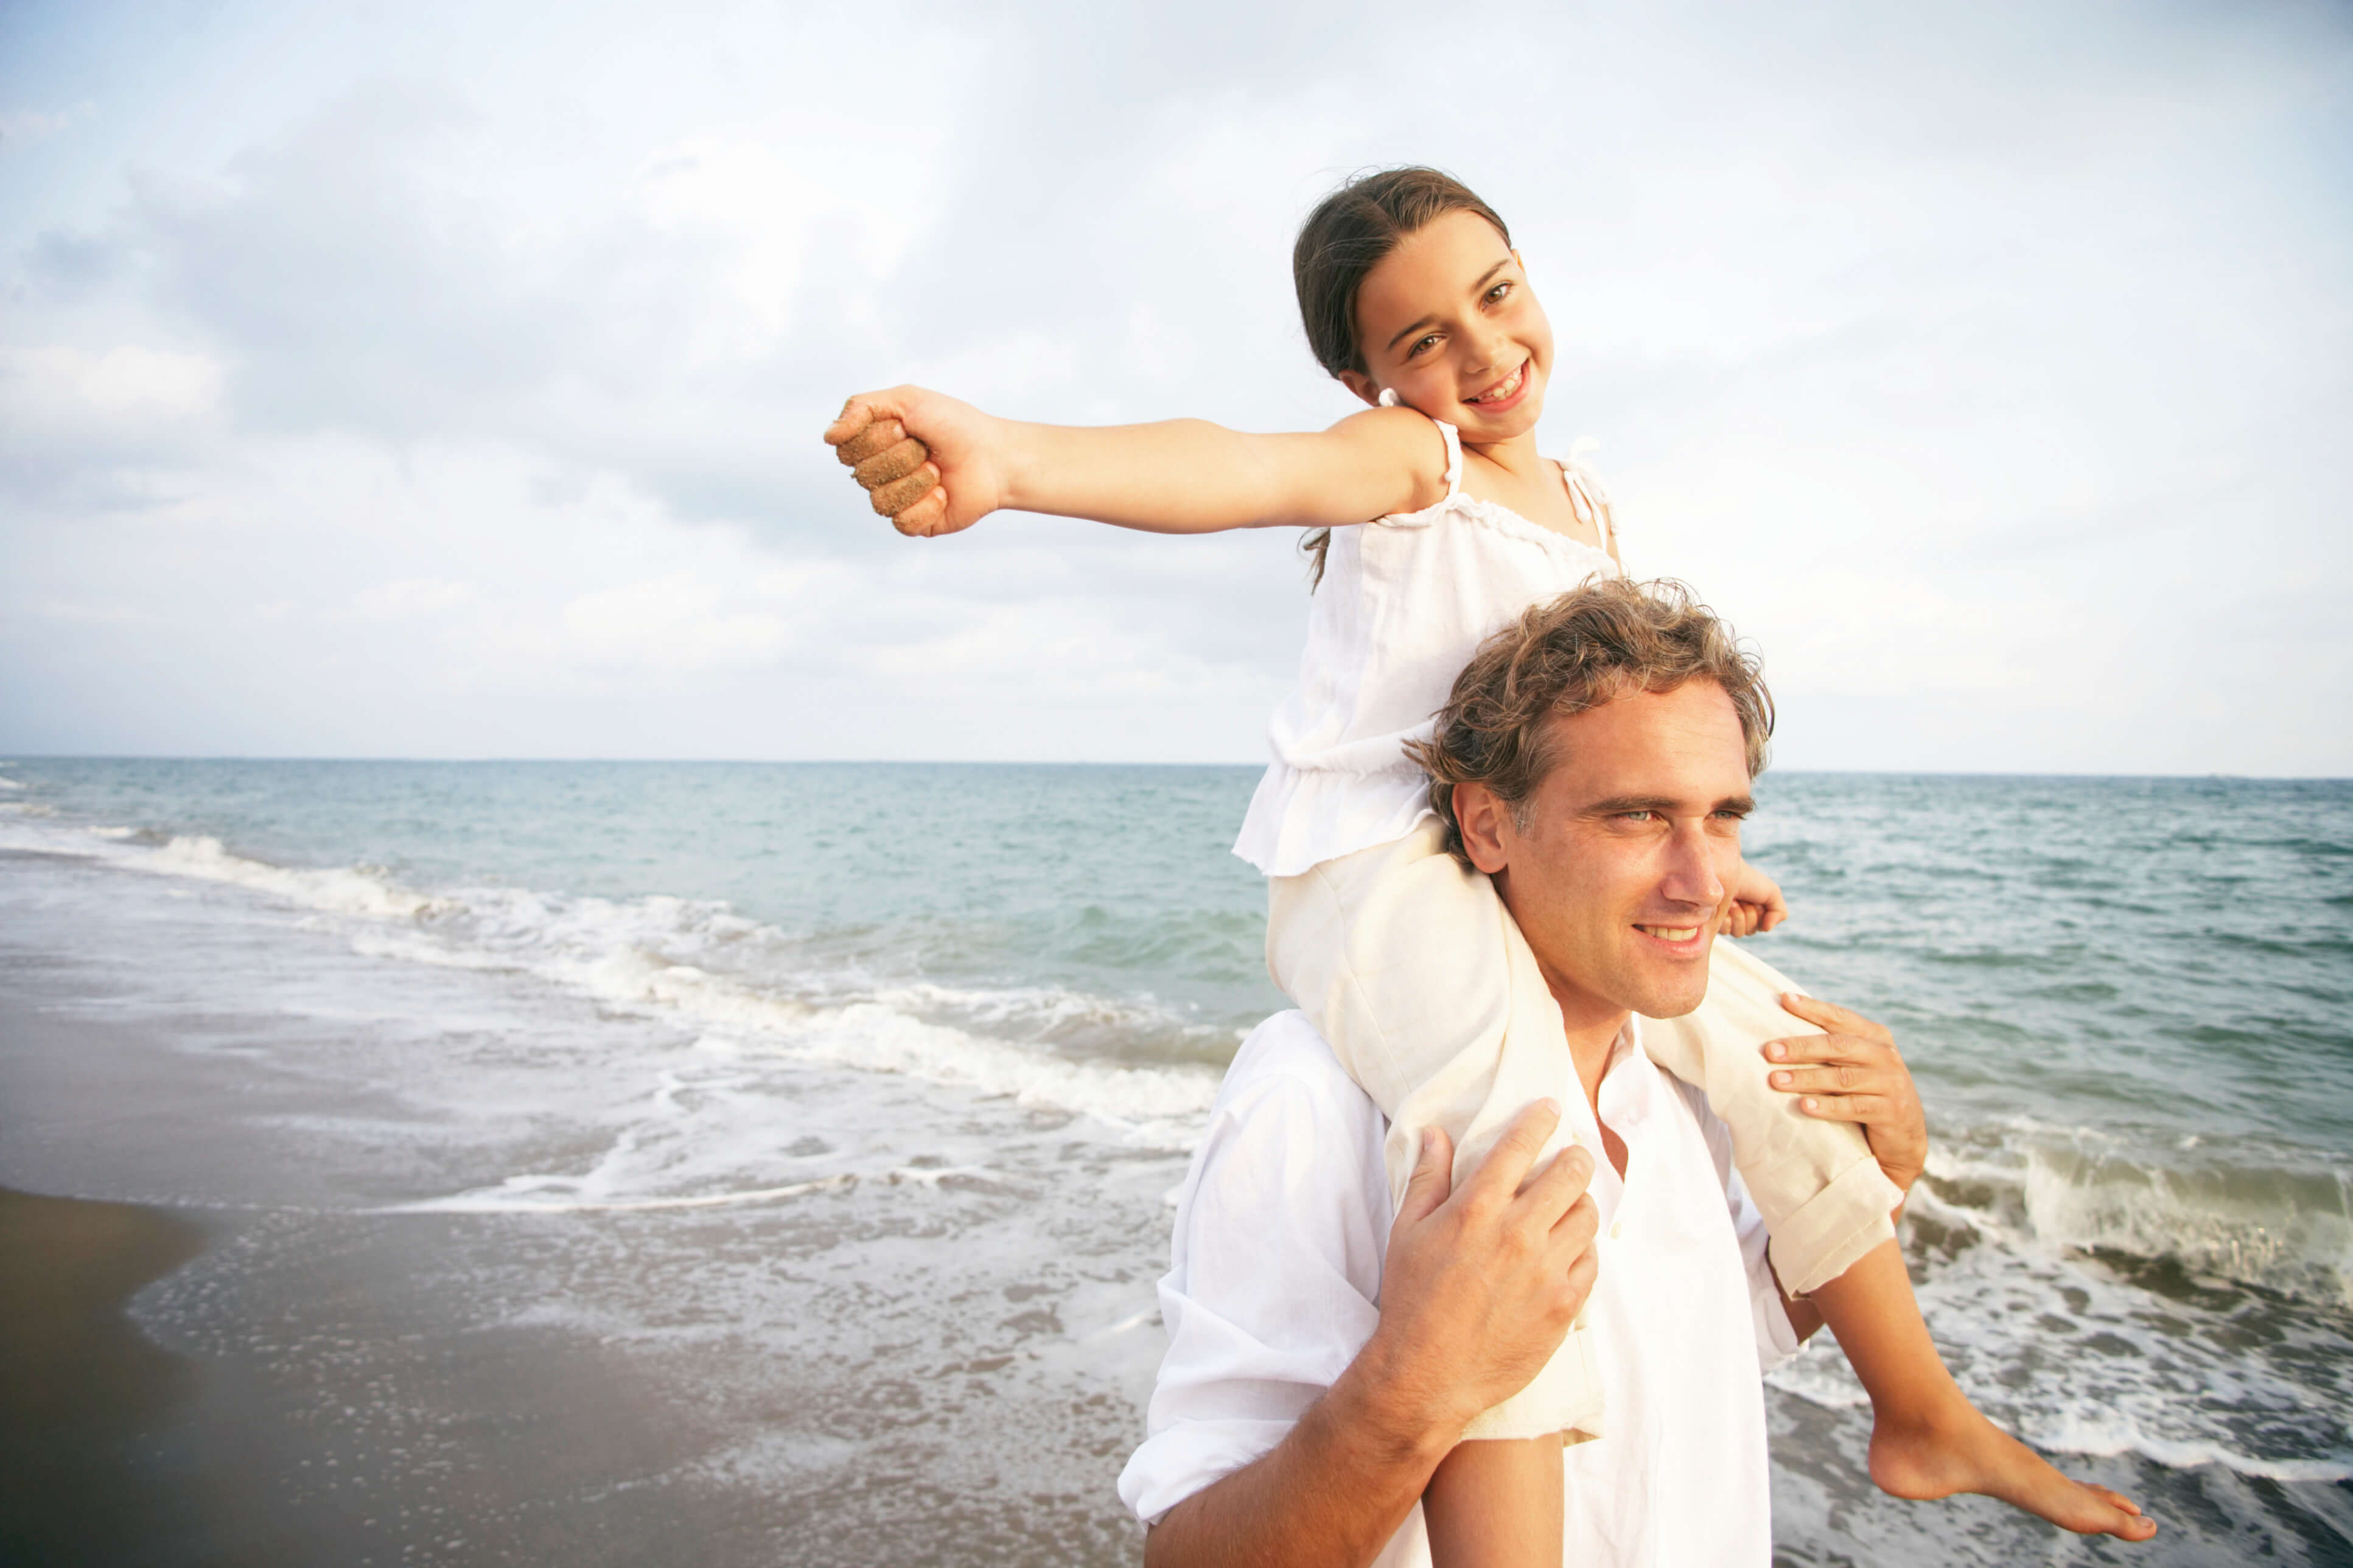 man on beach with young girl on his shoulders